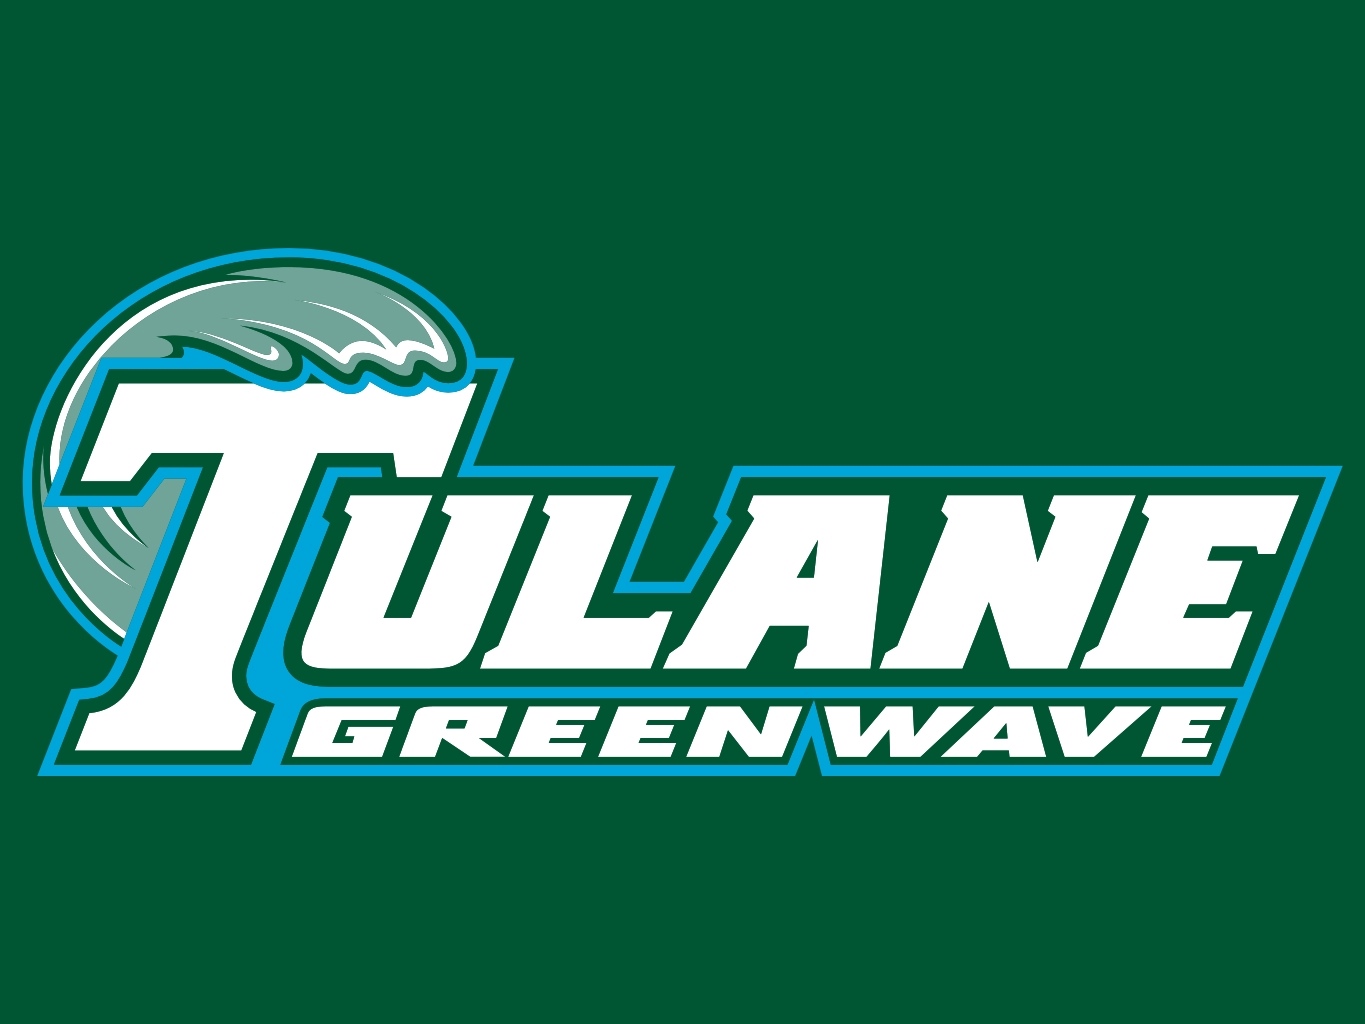 Buy Tulane Green Wave Tickets Today